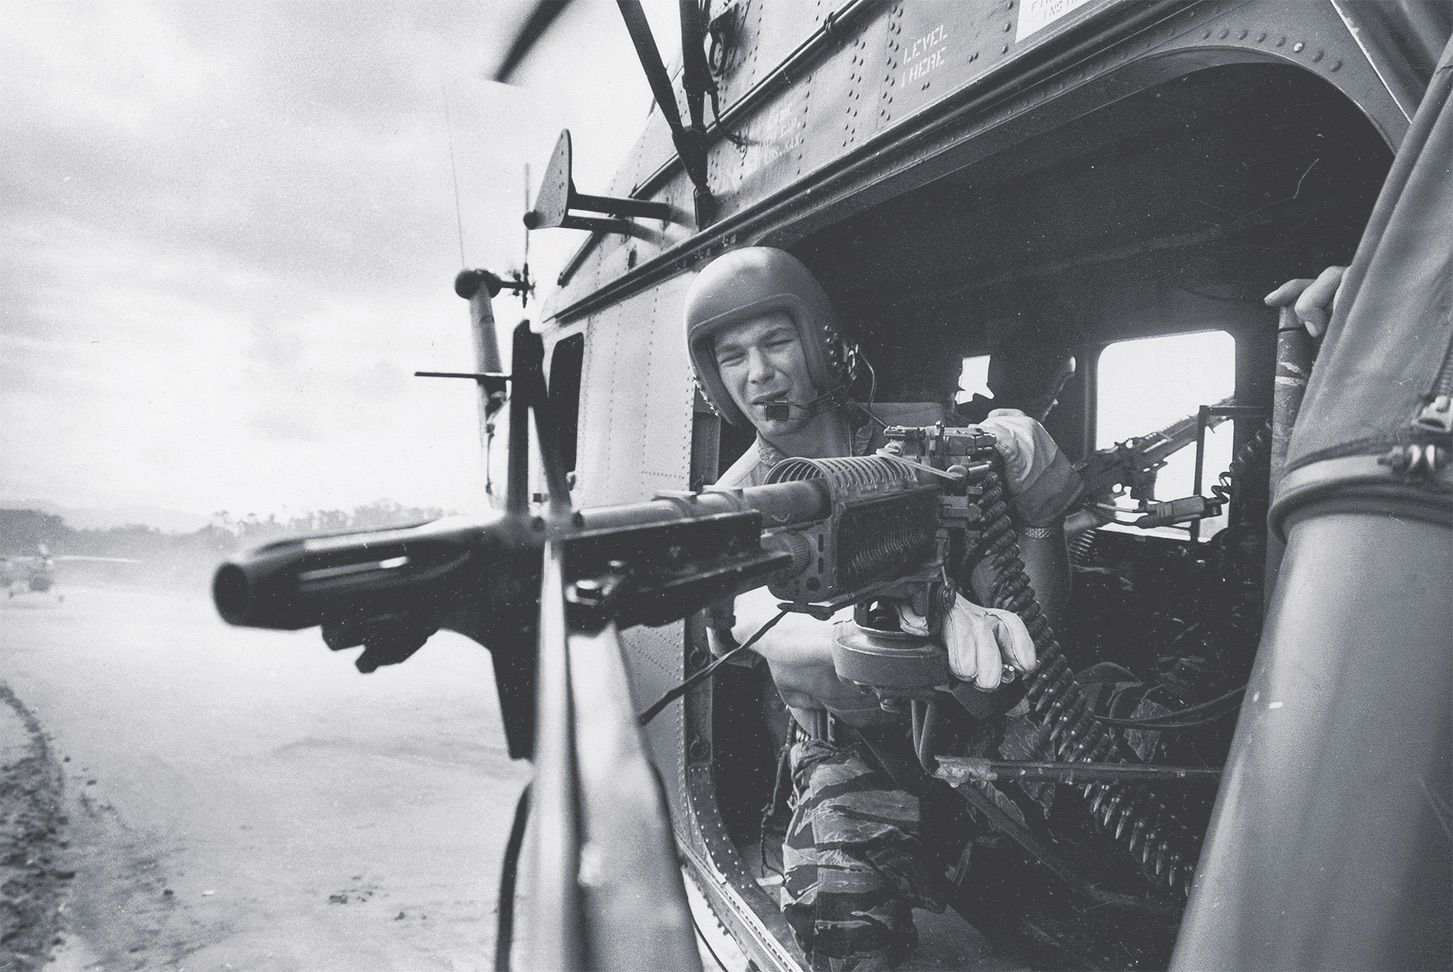 Marine Lance Cpl. James C. Farley fires an M60 machine gun from a helicopter near Da Nang on March 31, 1965. Larry Burrows/The Life Picture Collection via Getty Images.